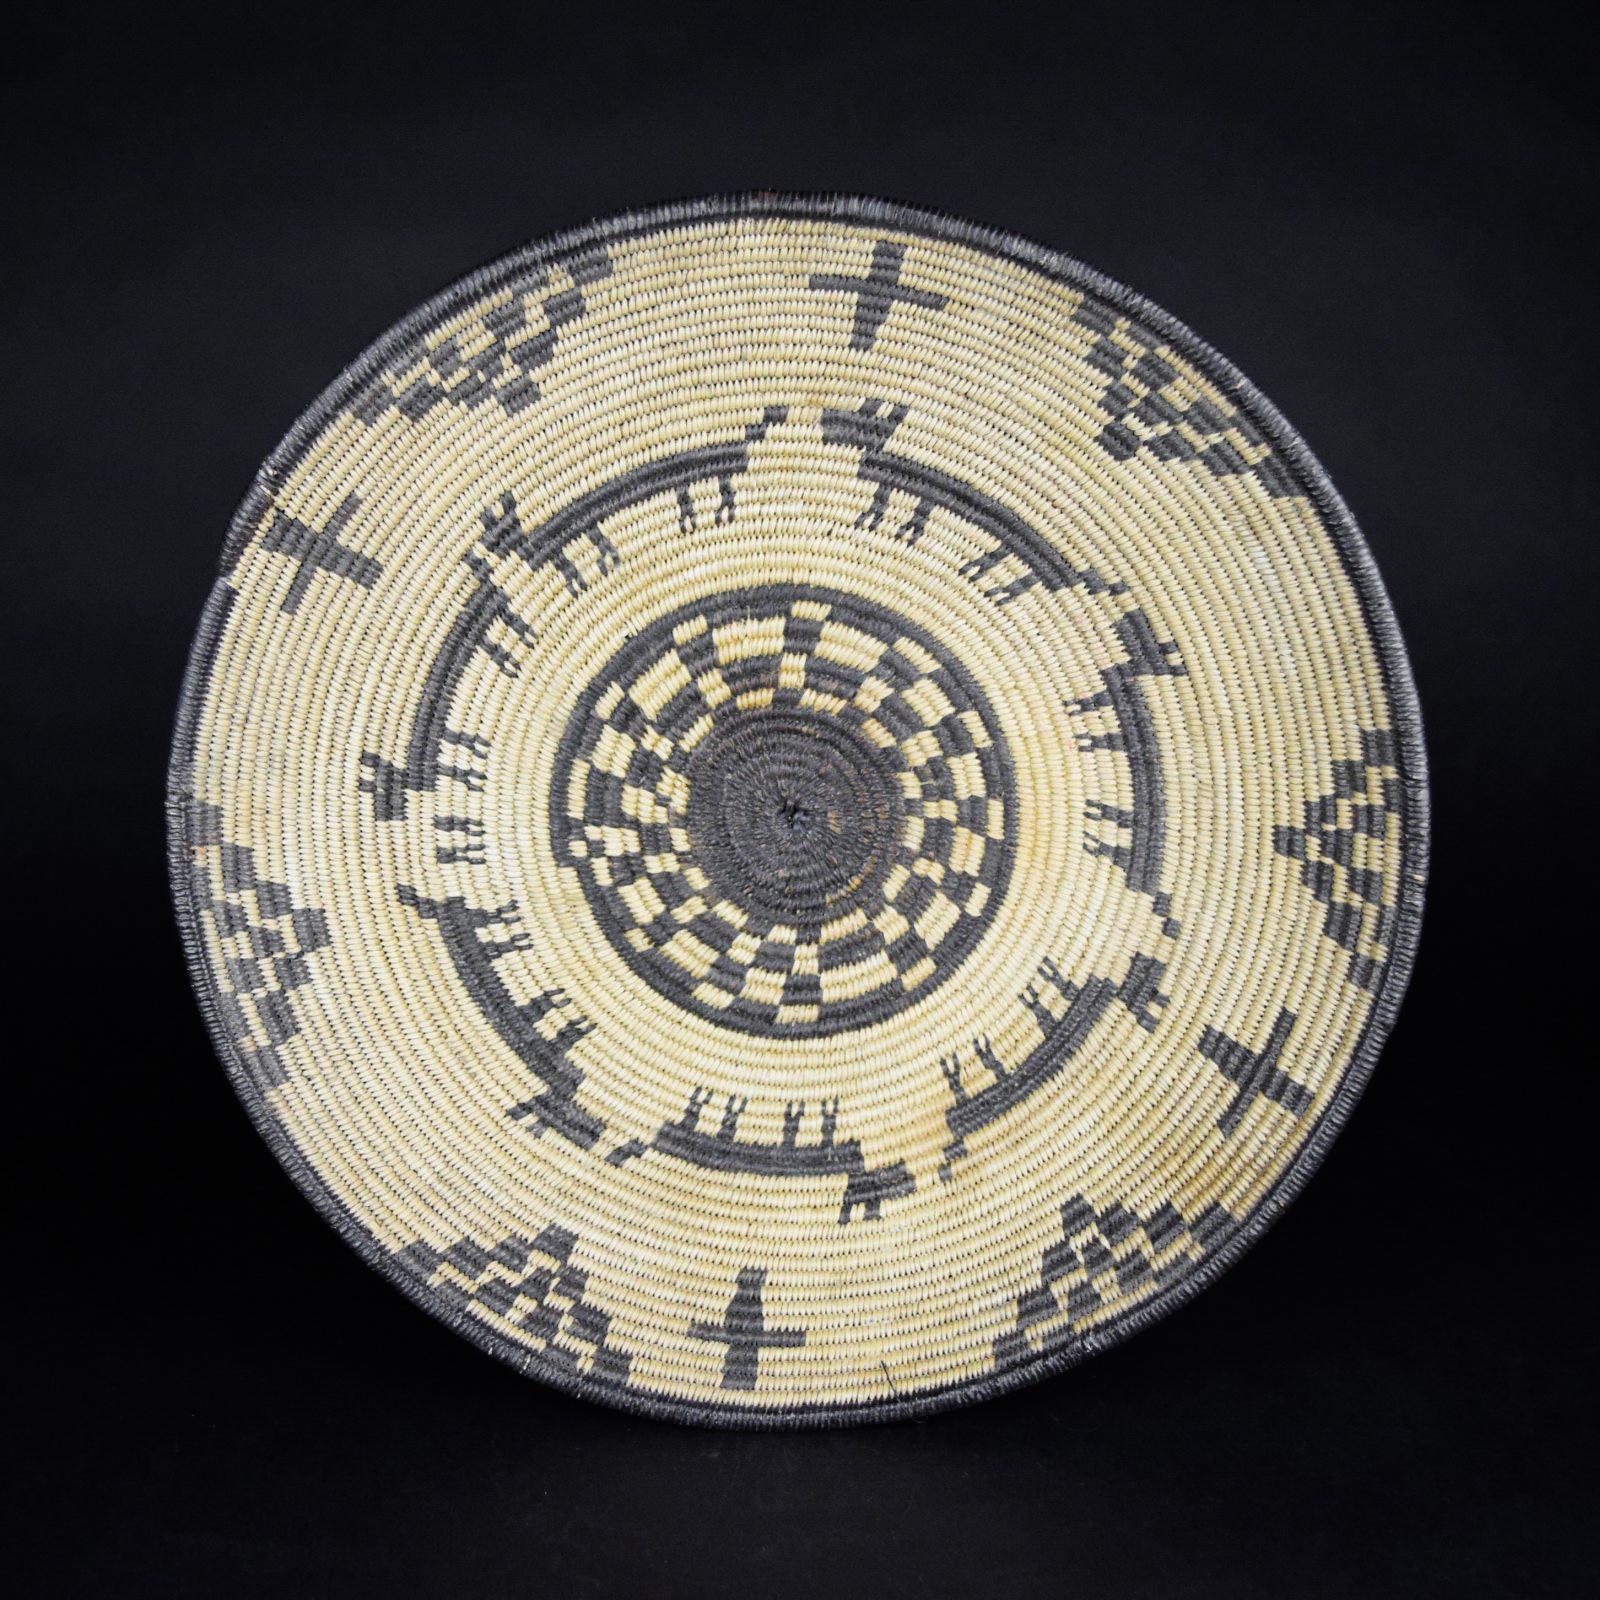 Apache pictorial tray with seven dogs and four crosses.

Period: Last quarter of the 19th century

Origin: Apache

Size: 12